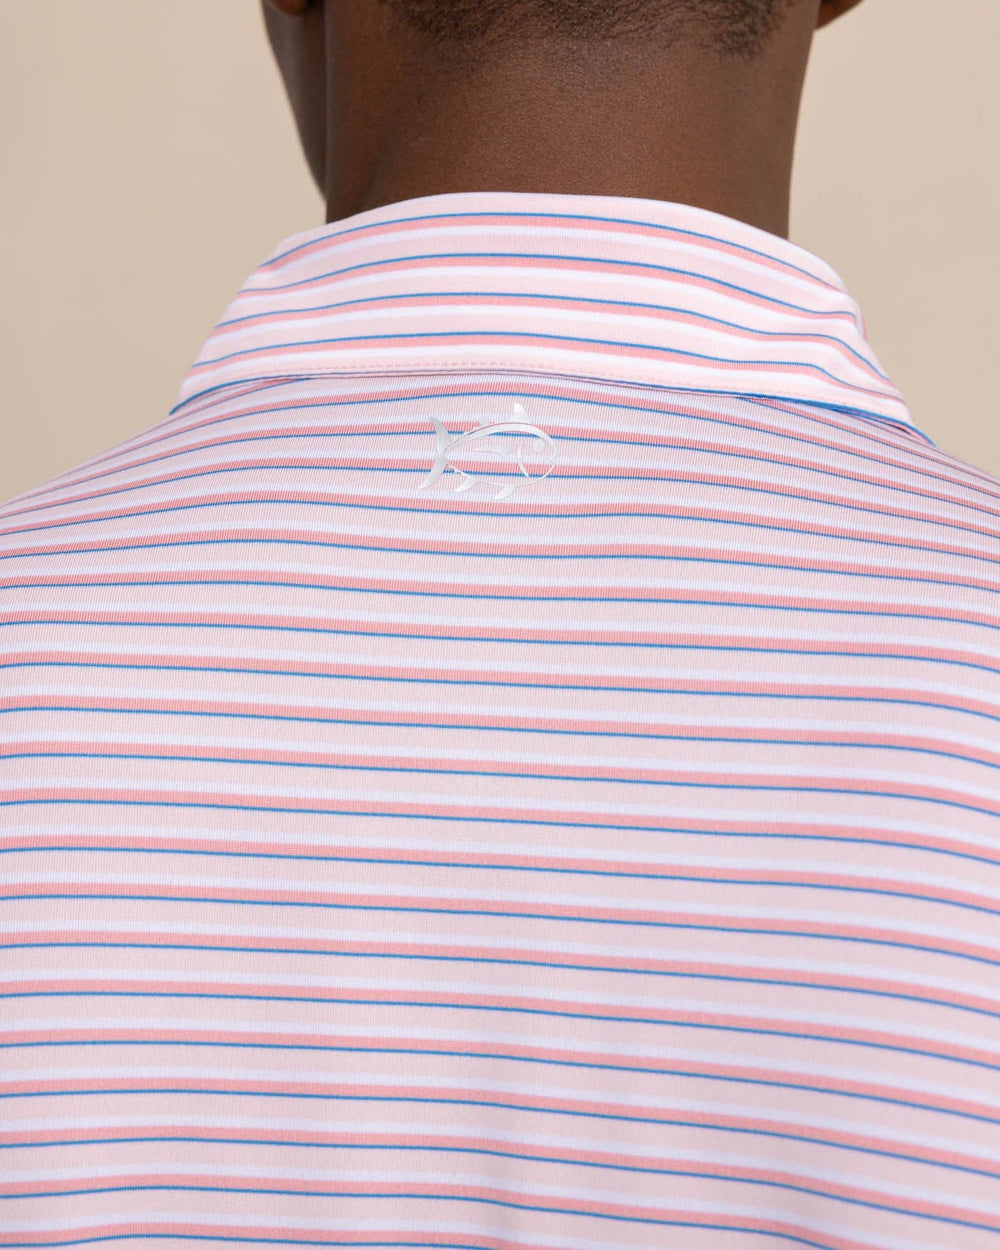 The detail view of the Southern Tide Driver Carova Stripe Polo Shirt by Southern Tide - Light Pink